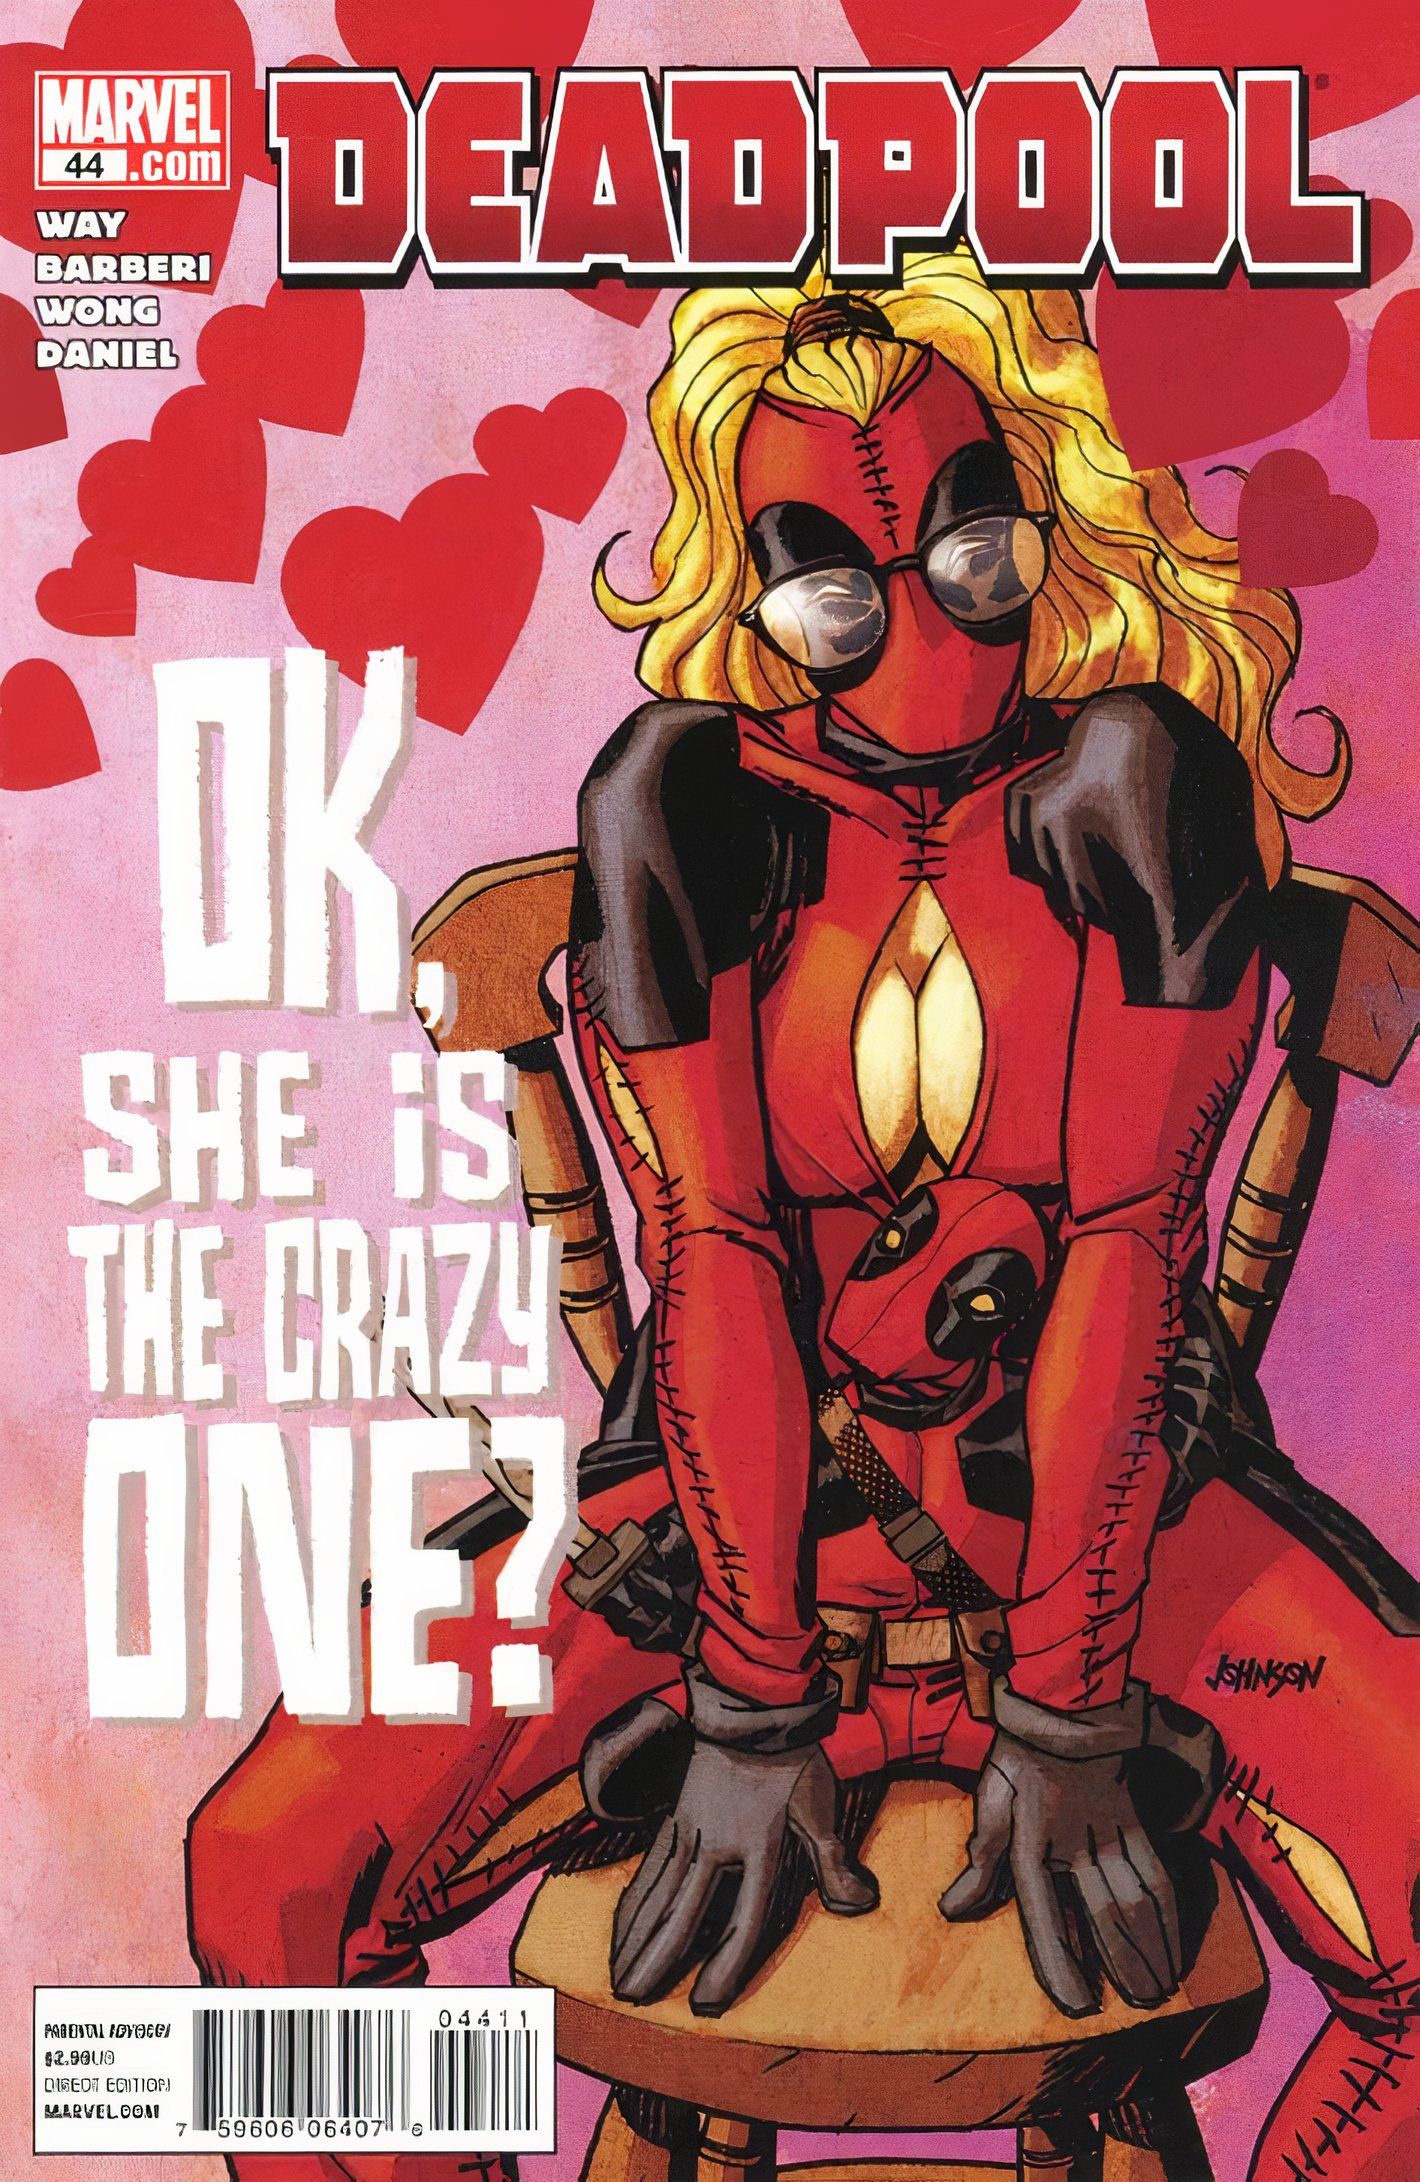 Deadpool #44 cover, featuring Dr. Ella Whitbey in her replica Deadpool costume